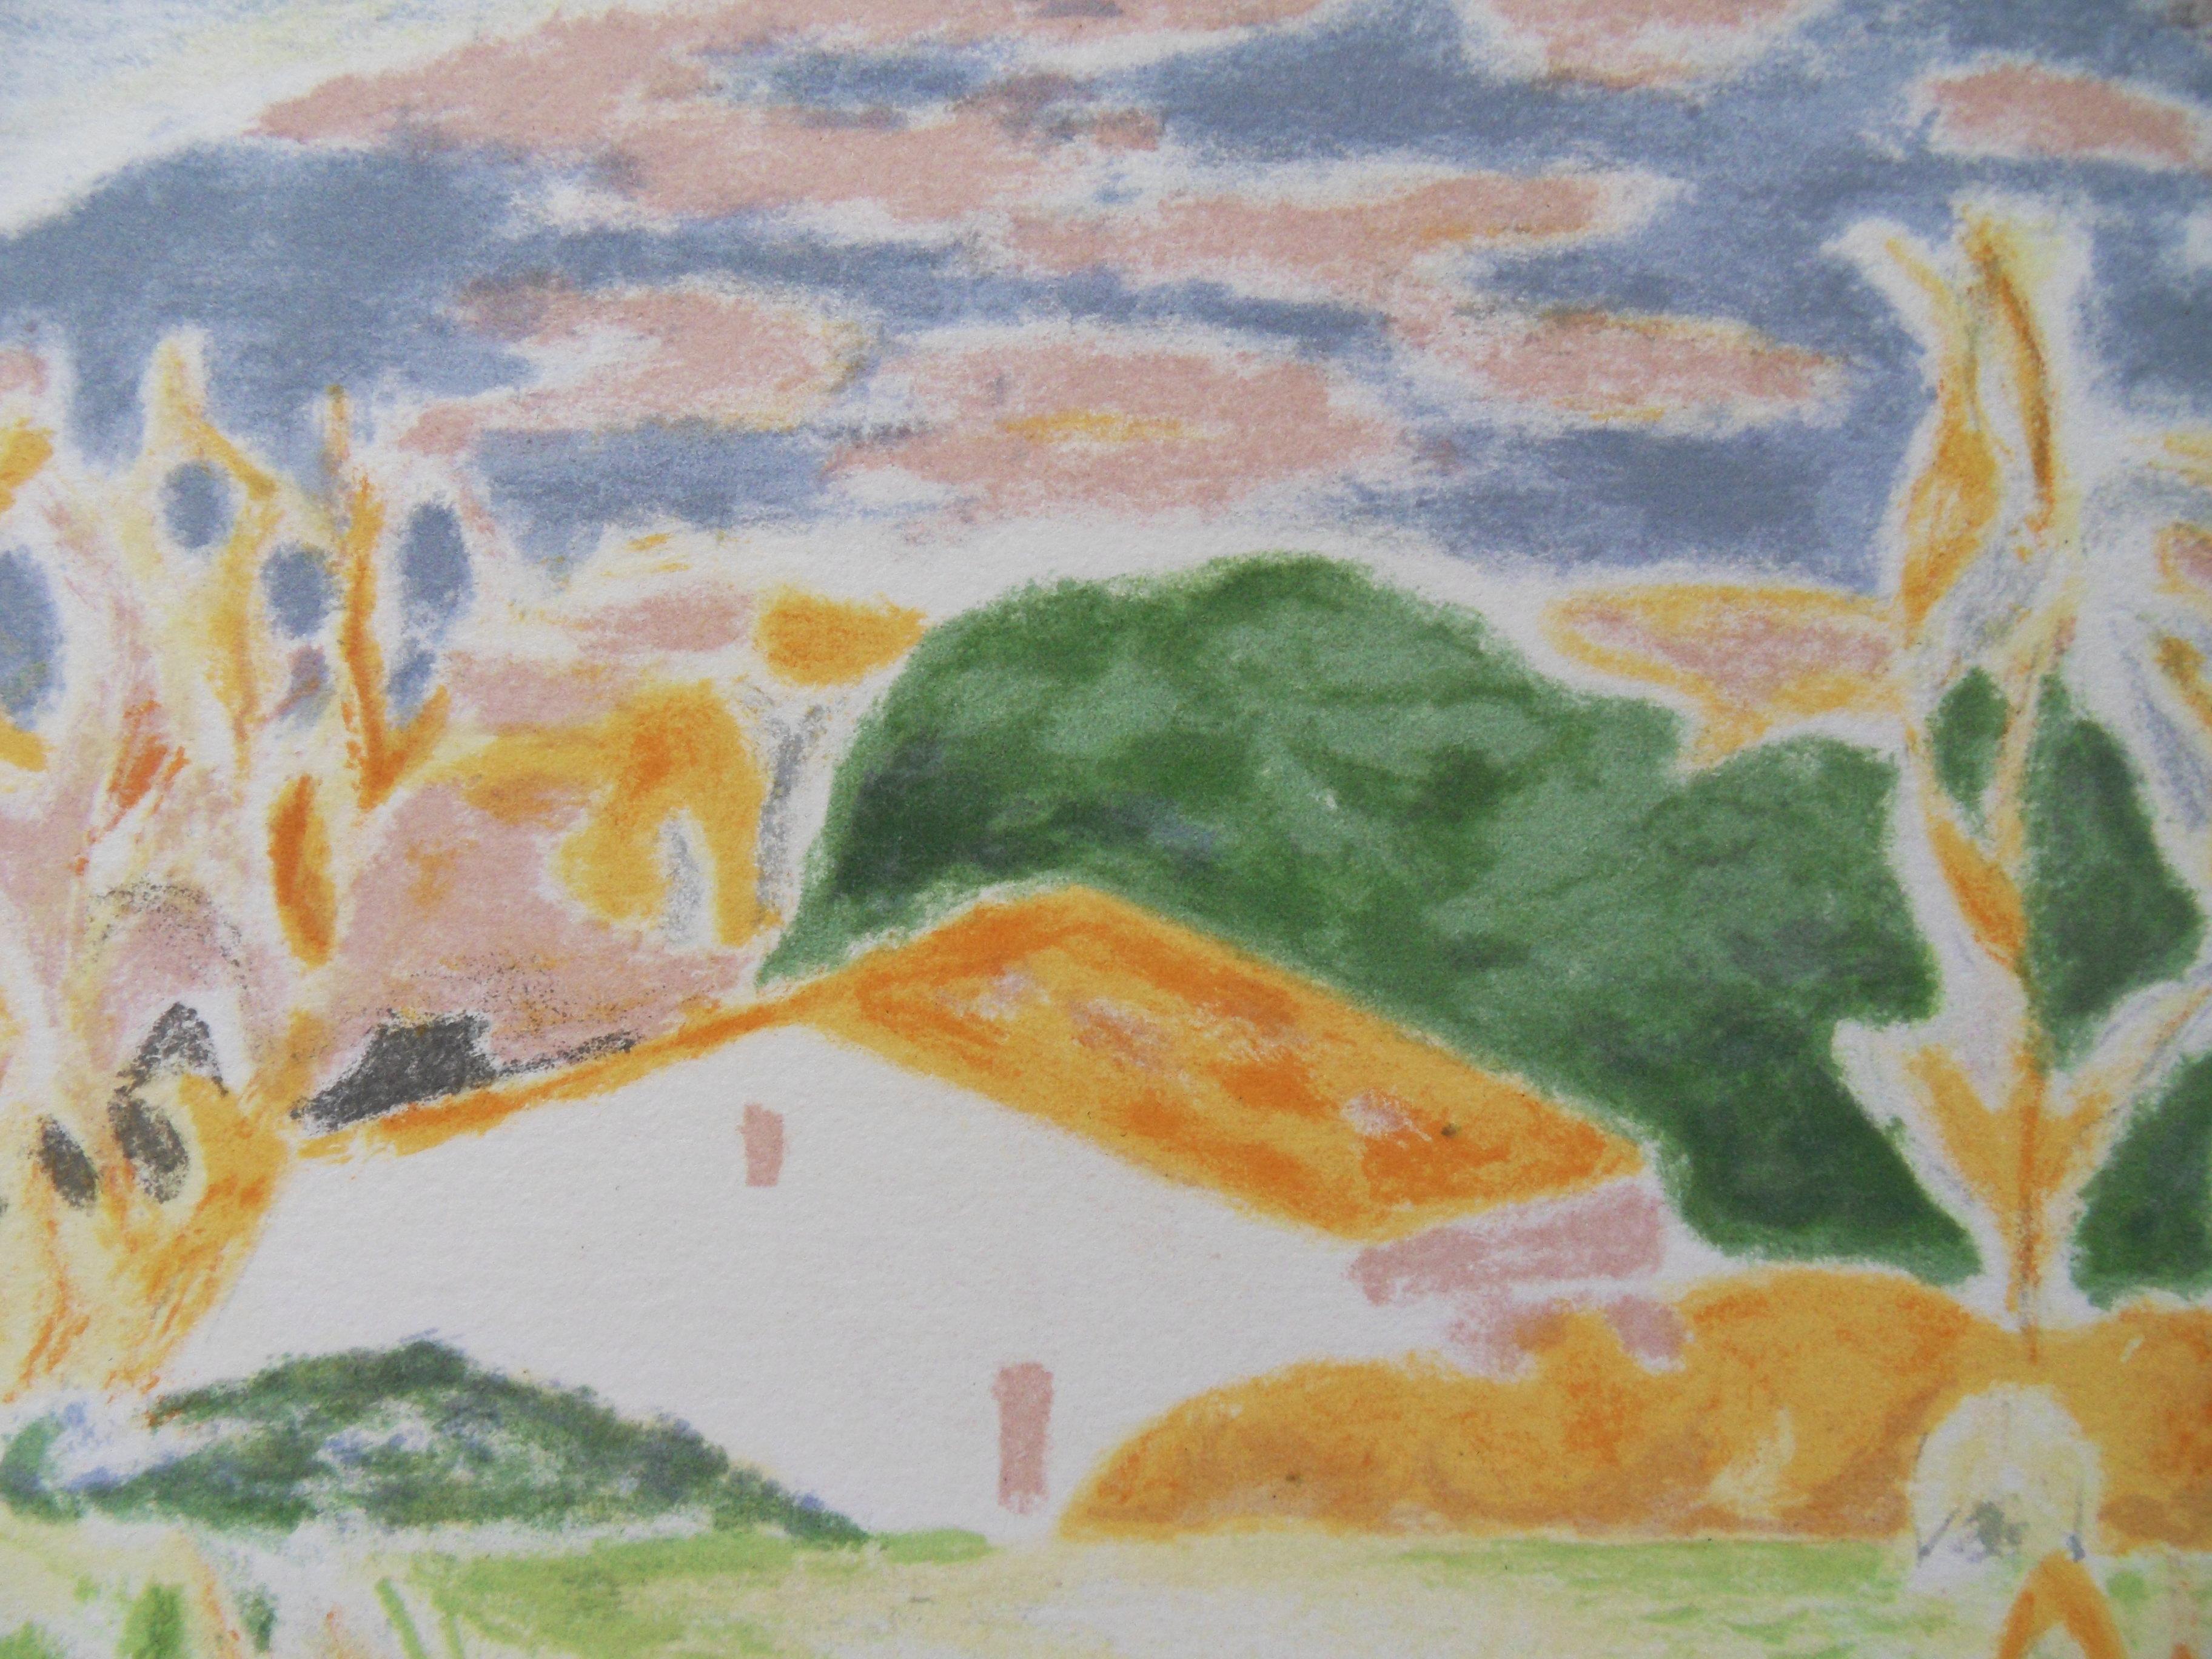 Landscape in Provence : The Old House - Original lithograph, Handsigned - Post-Impressionist Print by Jules Cavailles